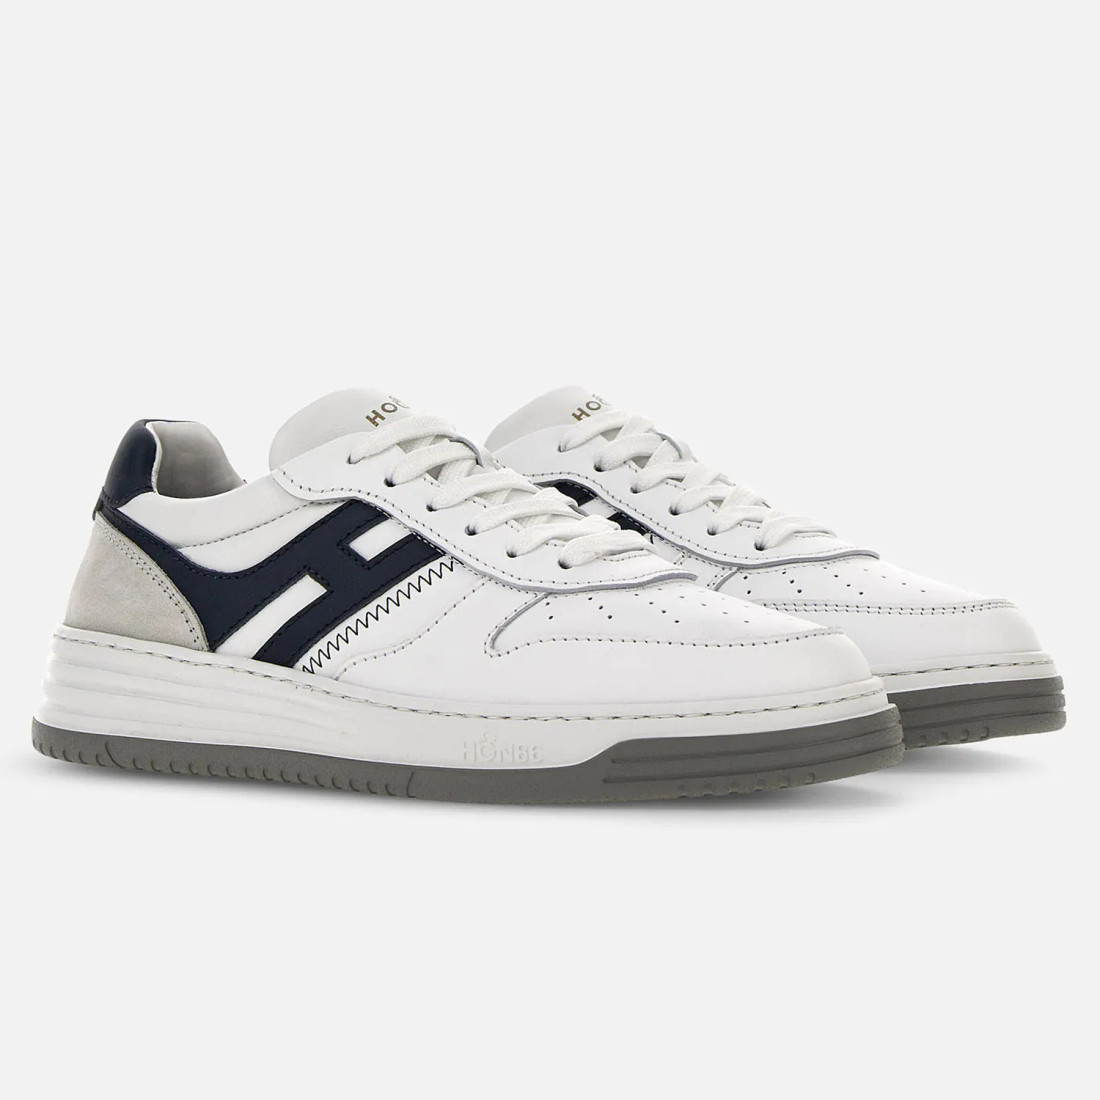 Hogan H630 white and blue men's sneakers in leather